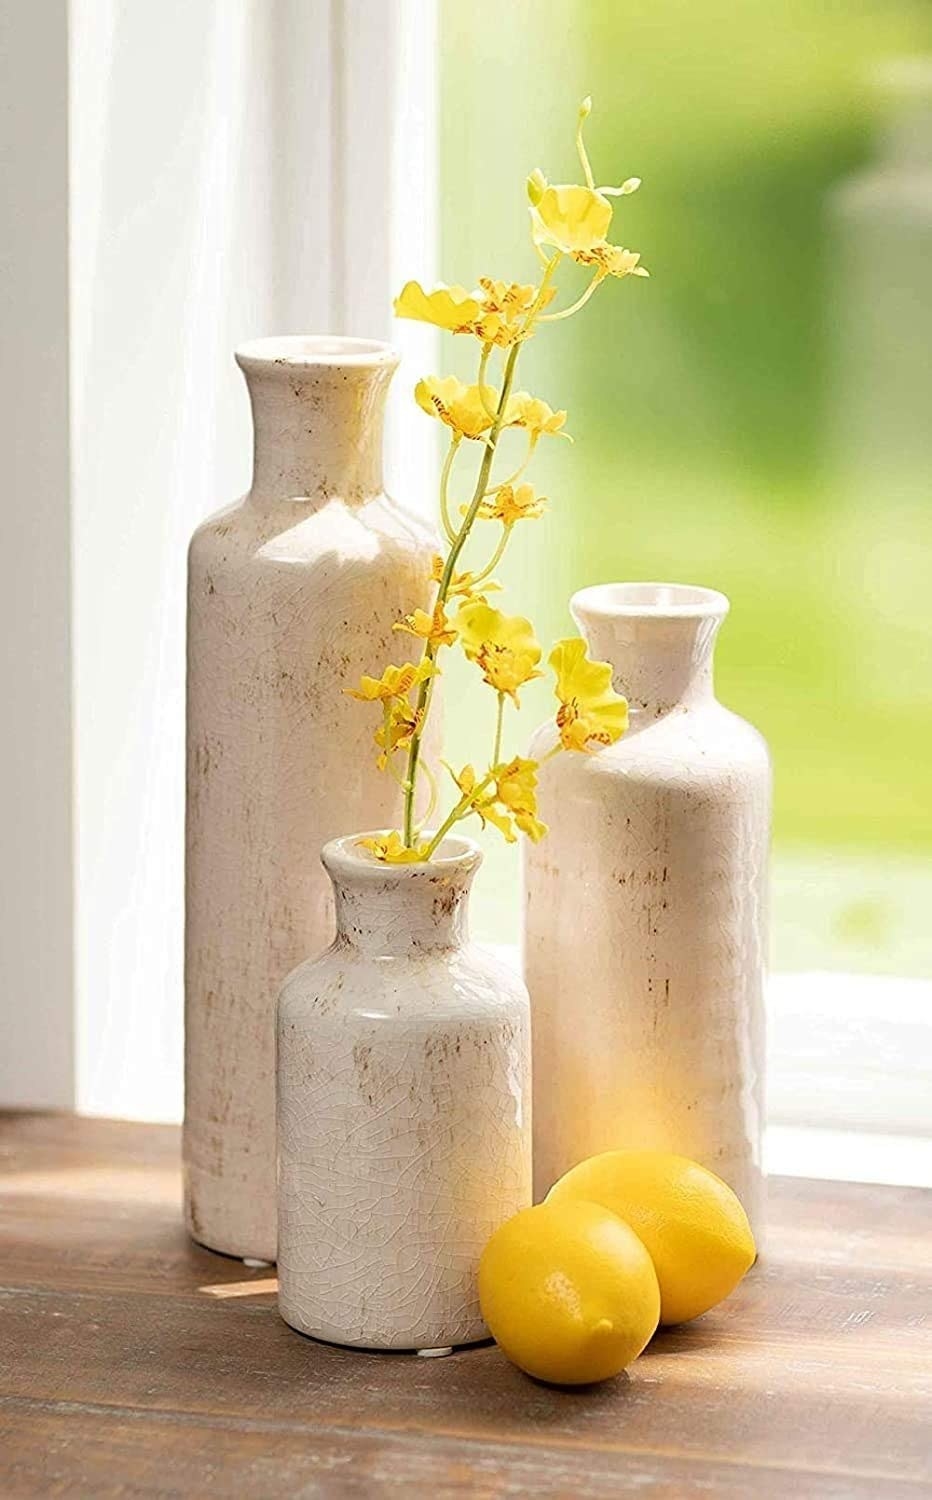 ceramic vases with yellow flowers in it